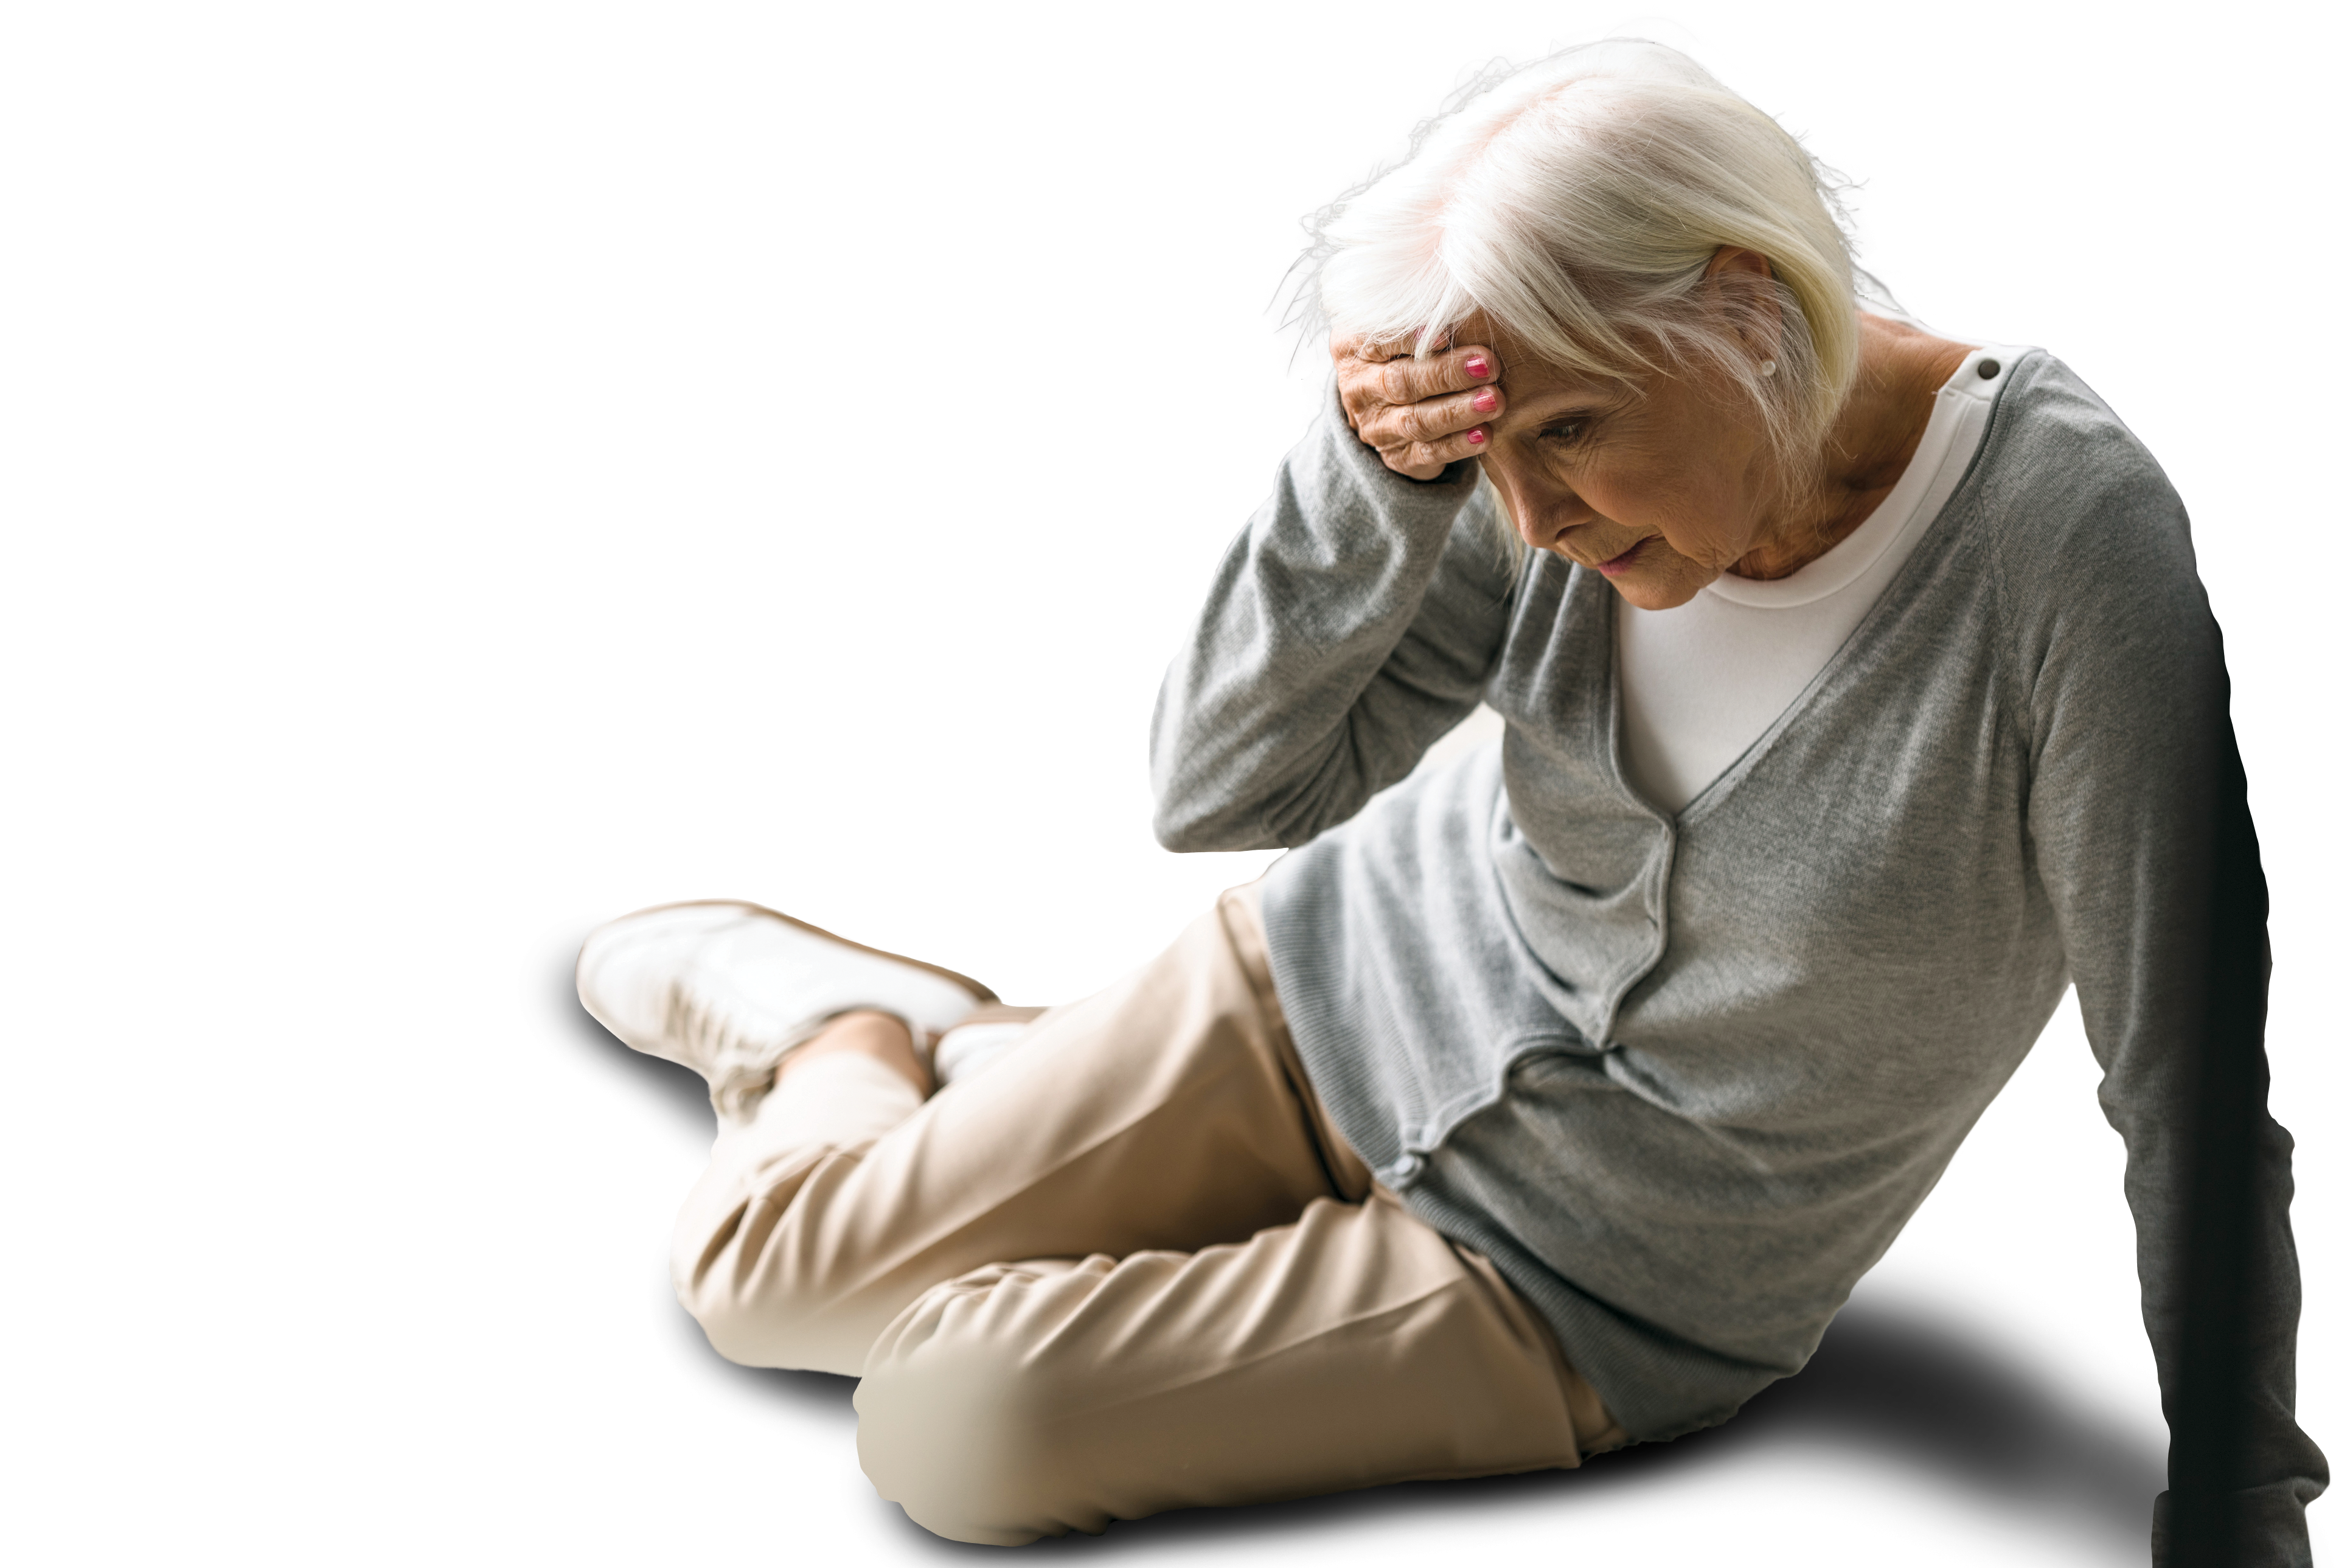 Consider the risk of postural hypotension and falls in older people(Image: iStock.com – LightFieldStudios)